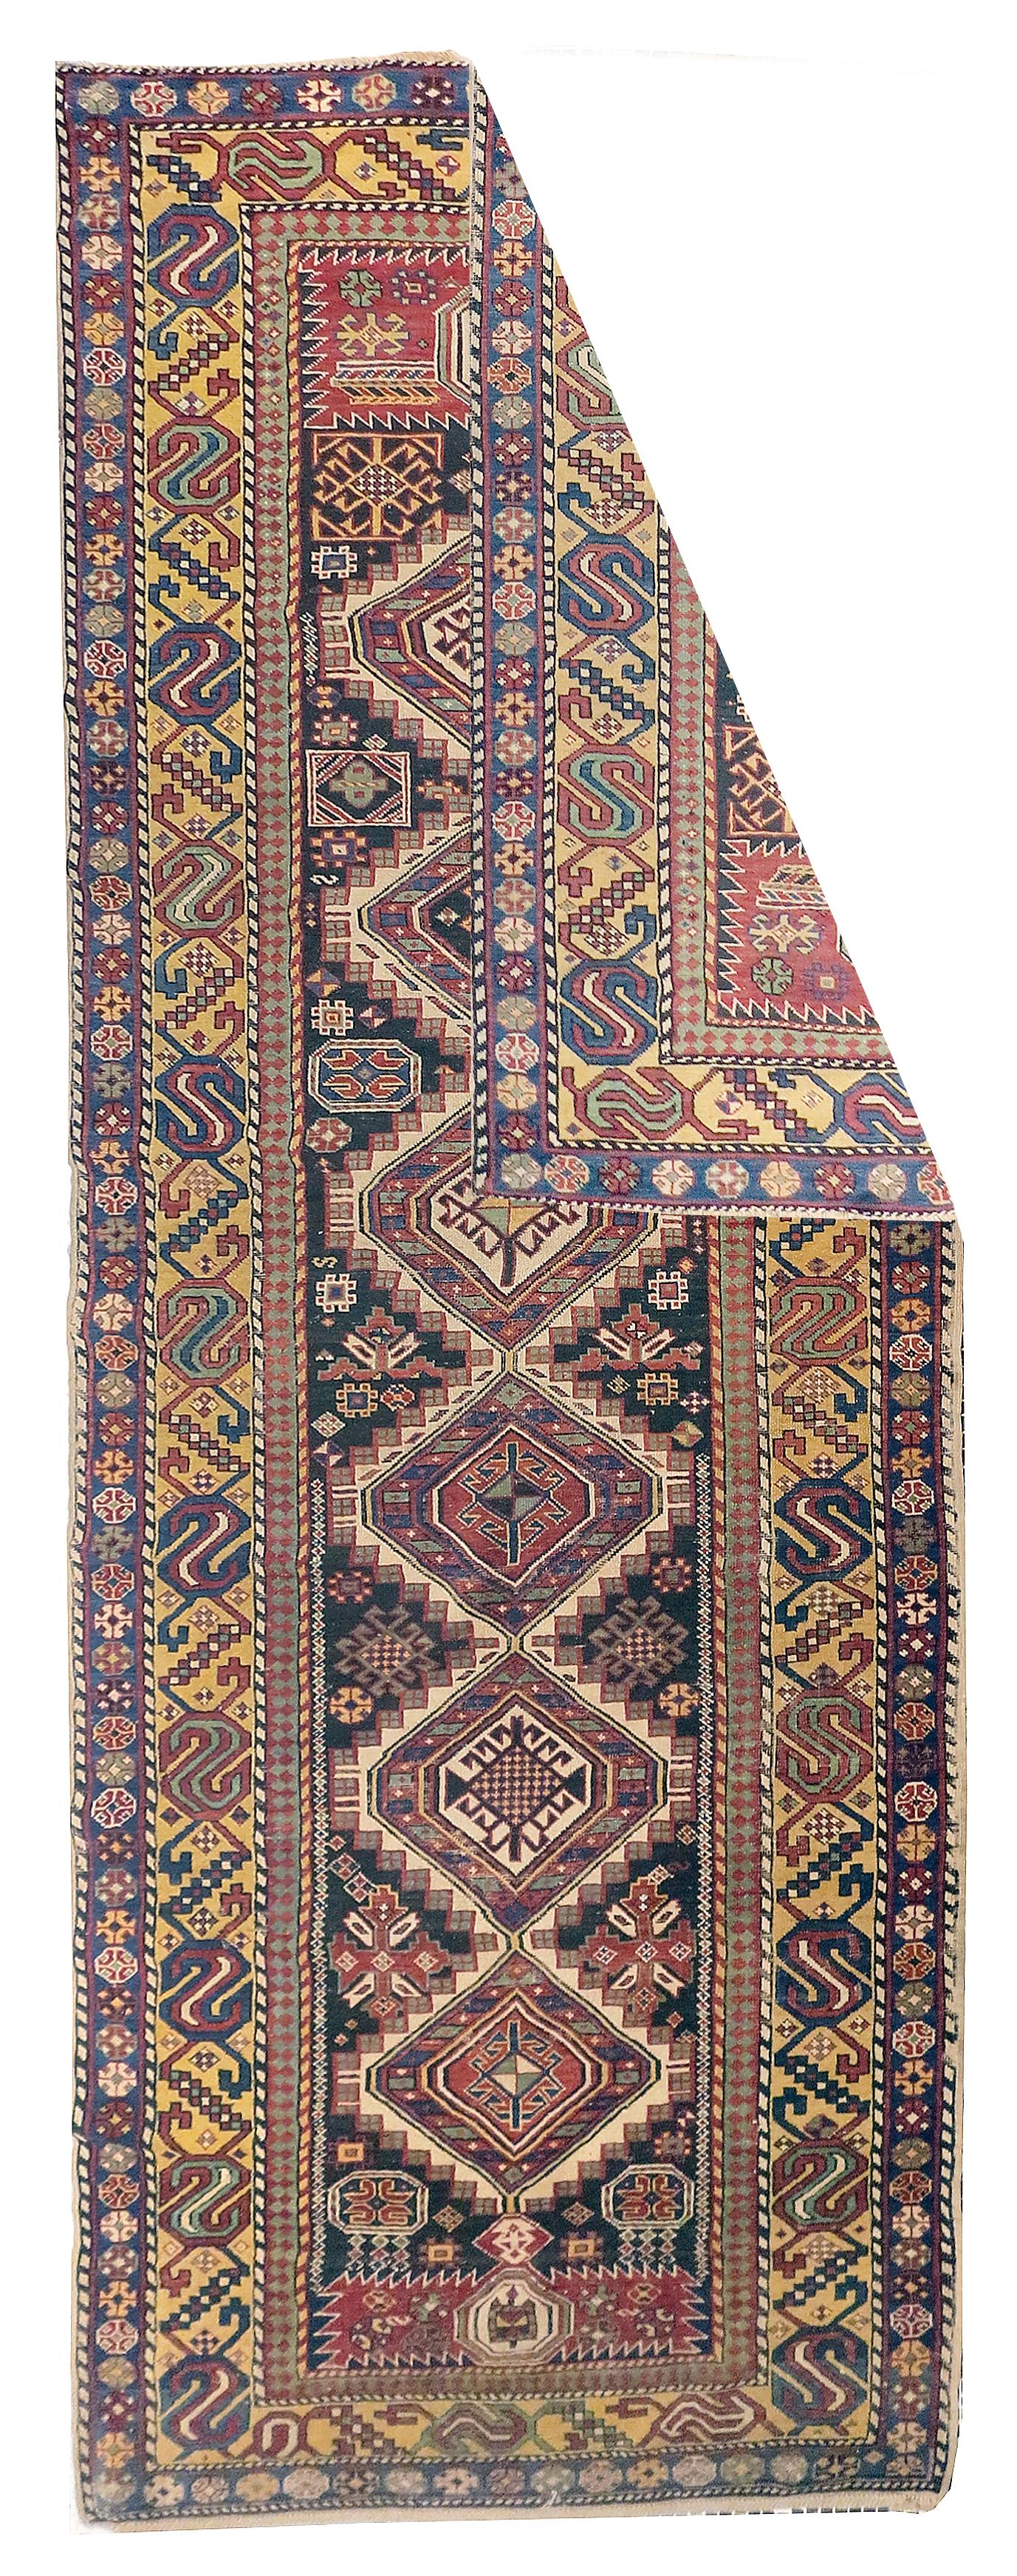 Fine antique Caucasian Shriven runner rug, hand knotted, circa 1890

Design: Multi Medalion

Shriven rug, floor covering handmade in the Shriven region of Azerbaijan in the southeastern Caucasus. With the exception of a group of rugs woven in